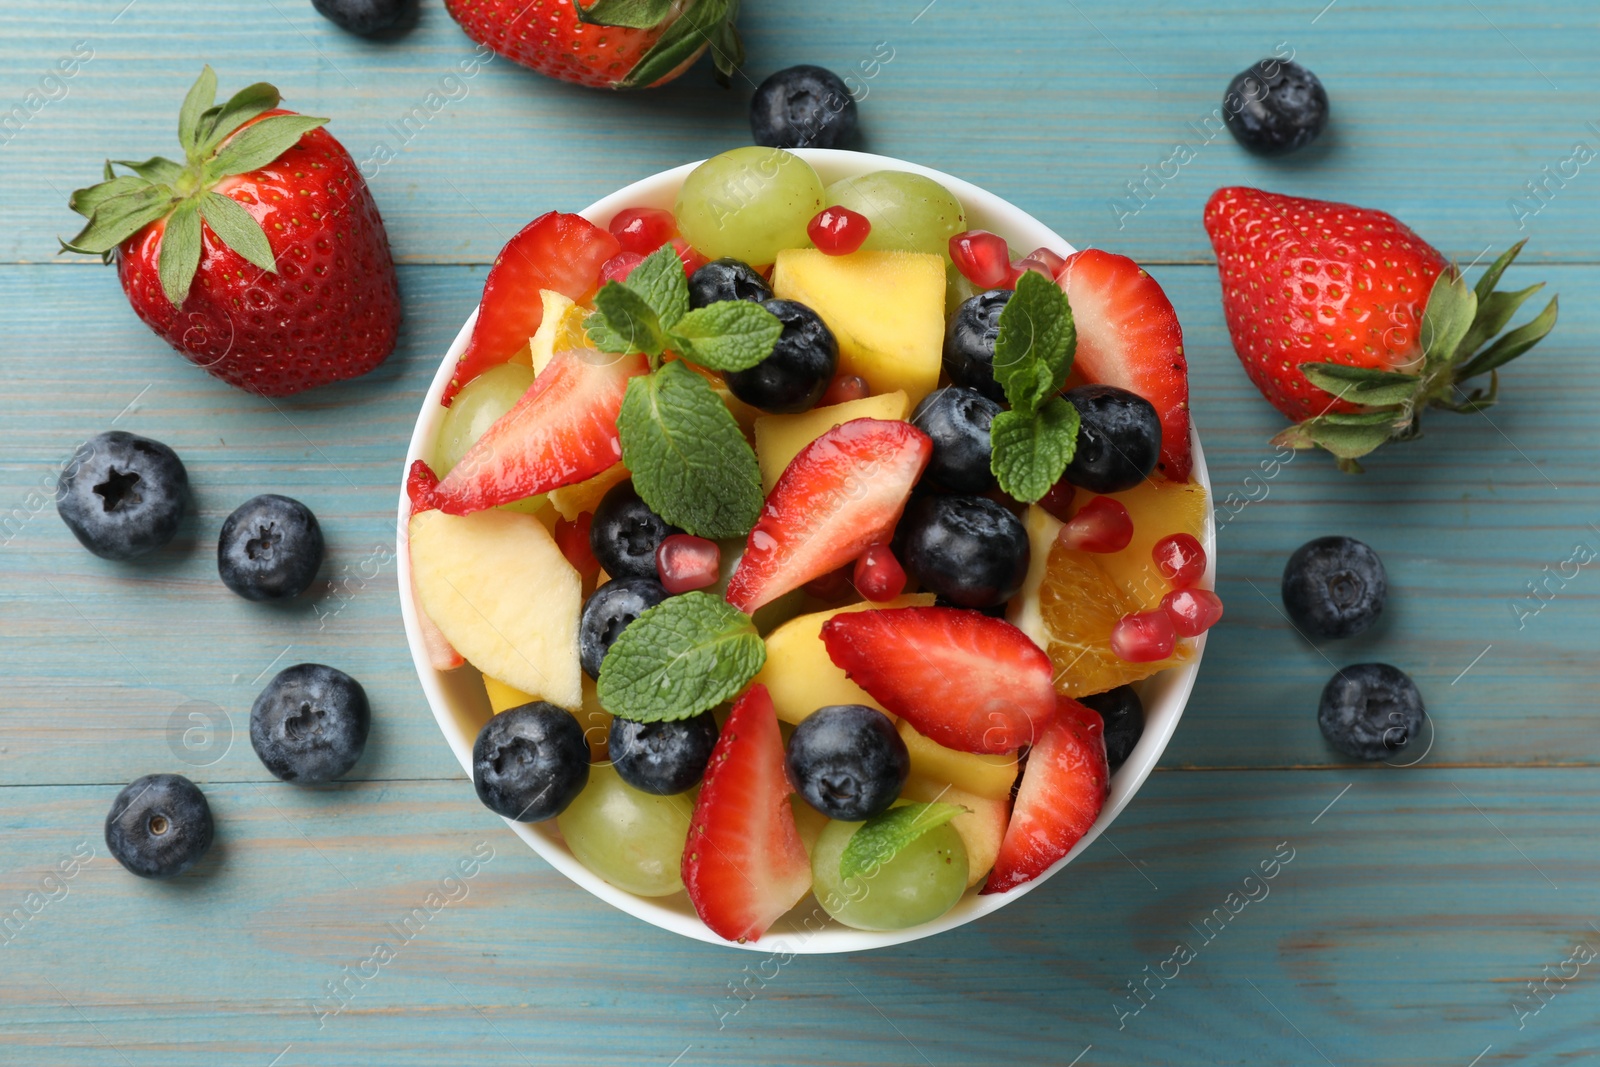 Photo of Tasty fruit salad in bowl and ingredients on light blue wooden table, flat lay